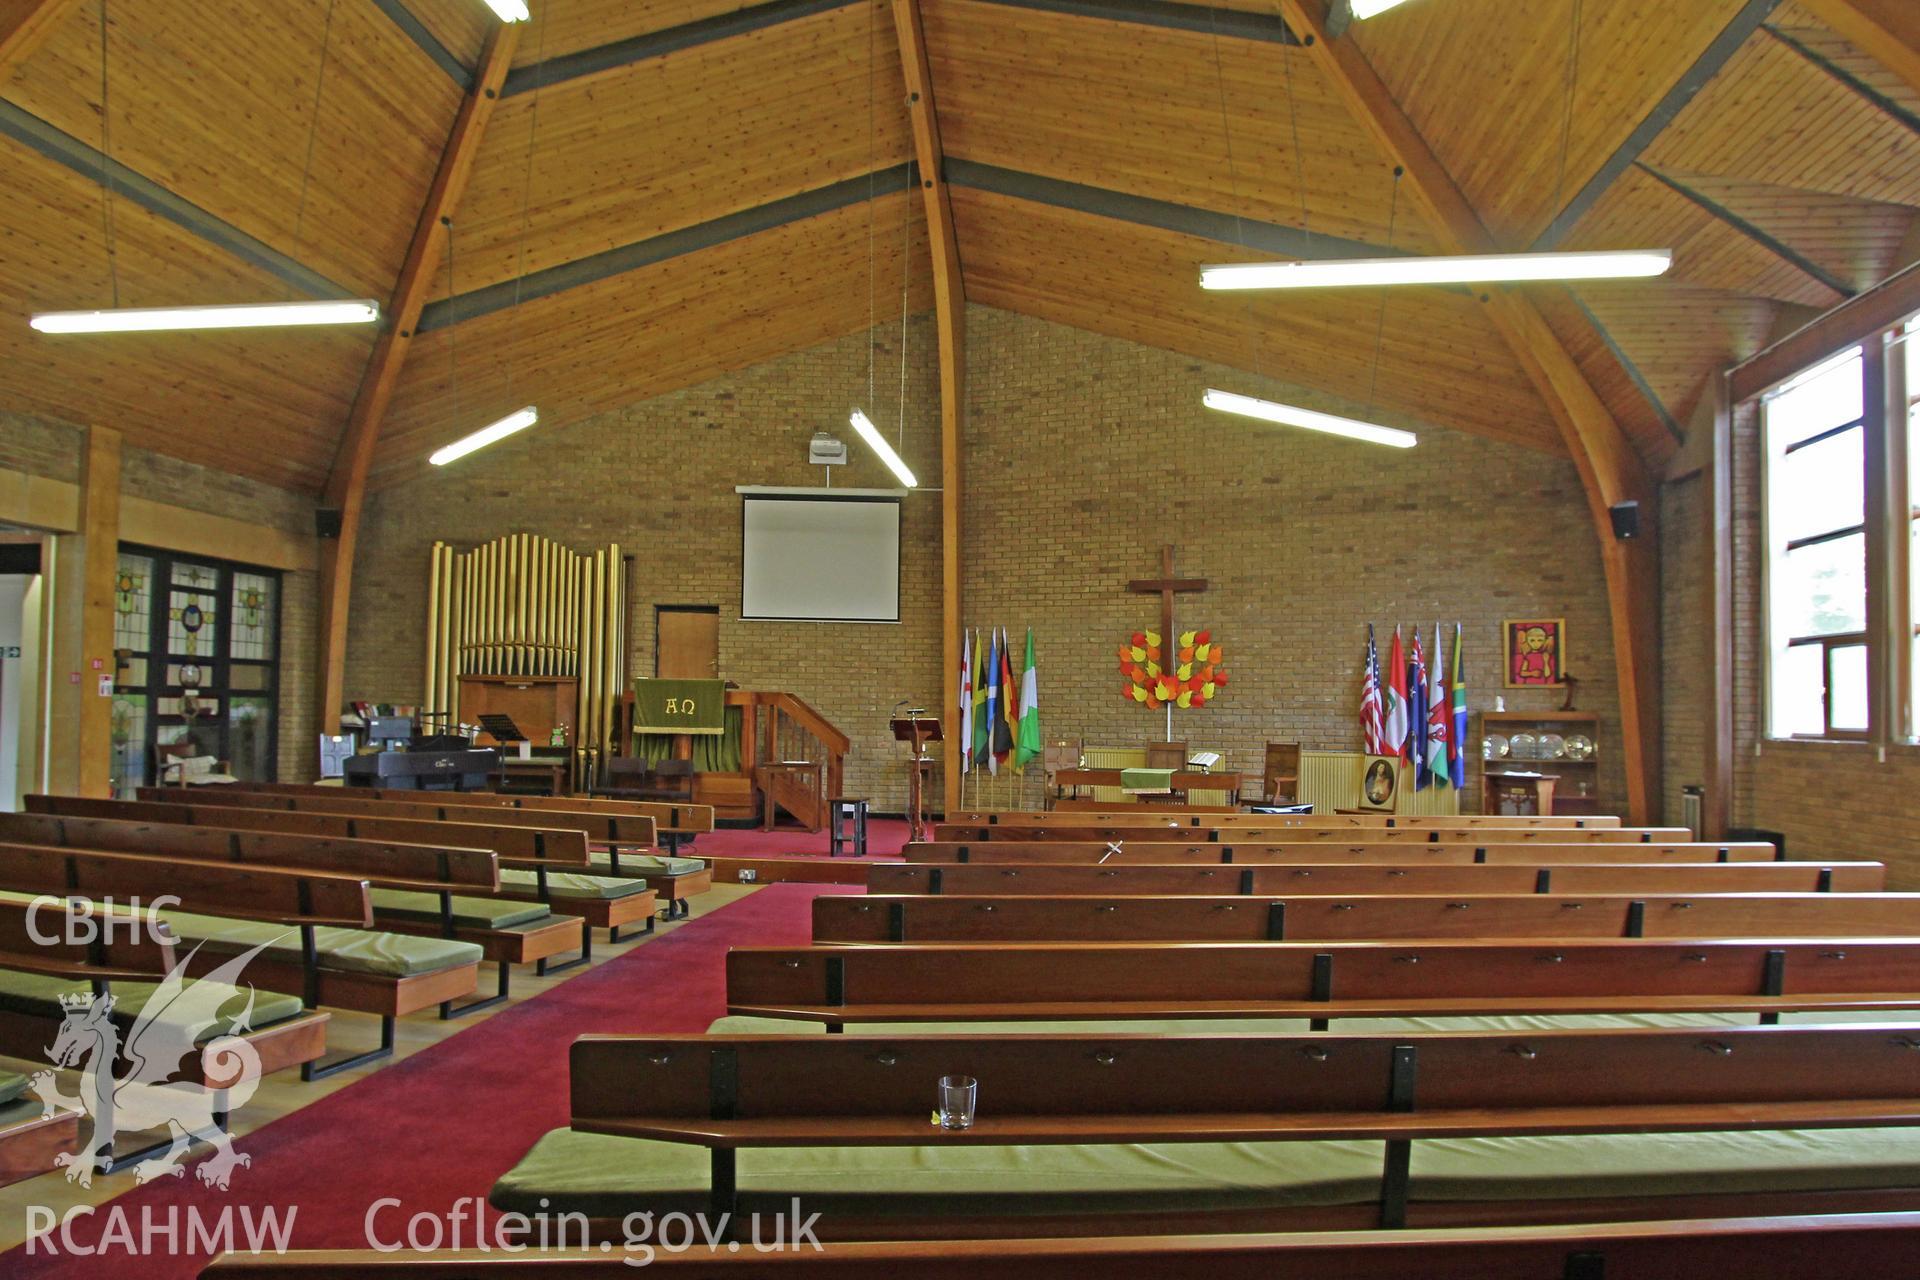 Colour photograph showing interior view of the Riverside chapel, Port Talbot. Photographed during survey conducted by Geoff Ward on 5th July 2016.